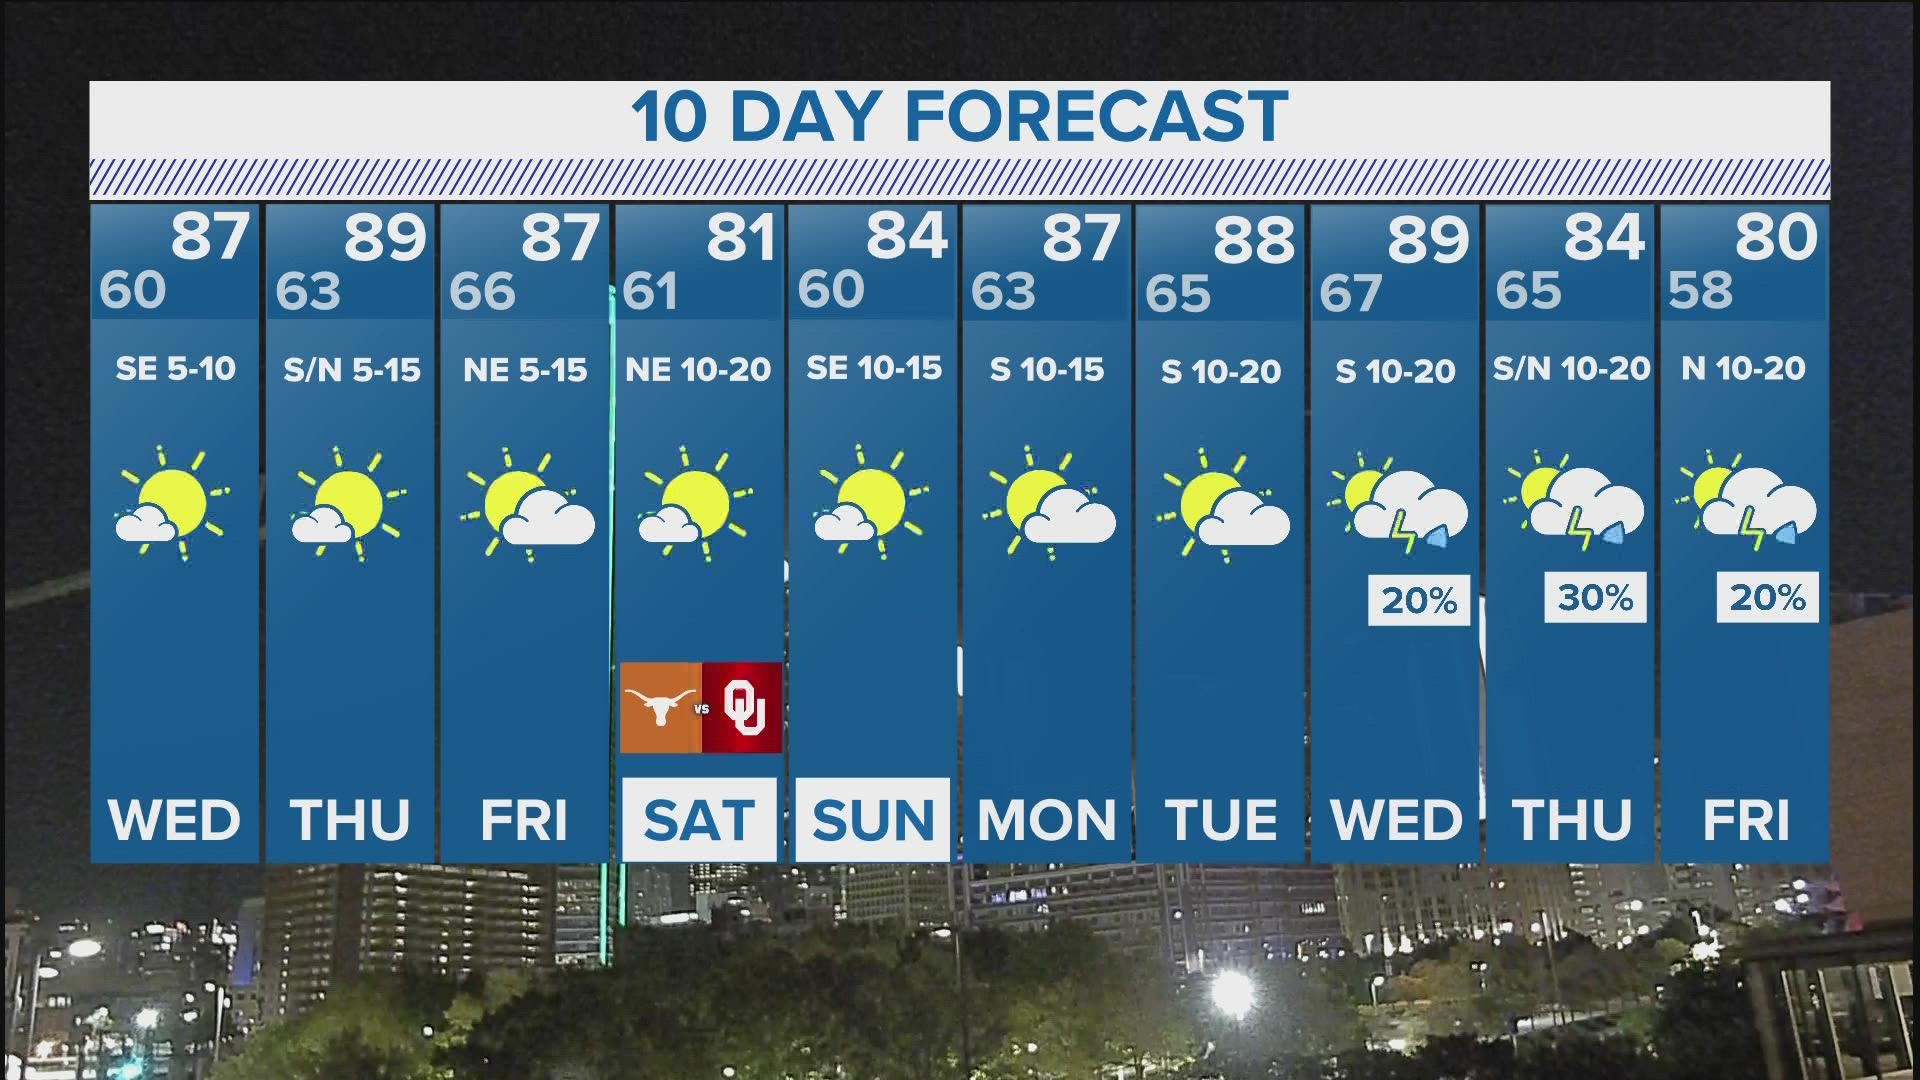 North Texas will be near 90 by Thursday but then temperatures drop from there. Here's the latest.